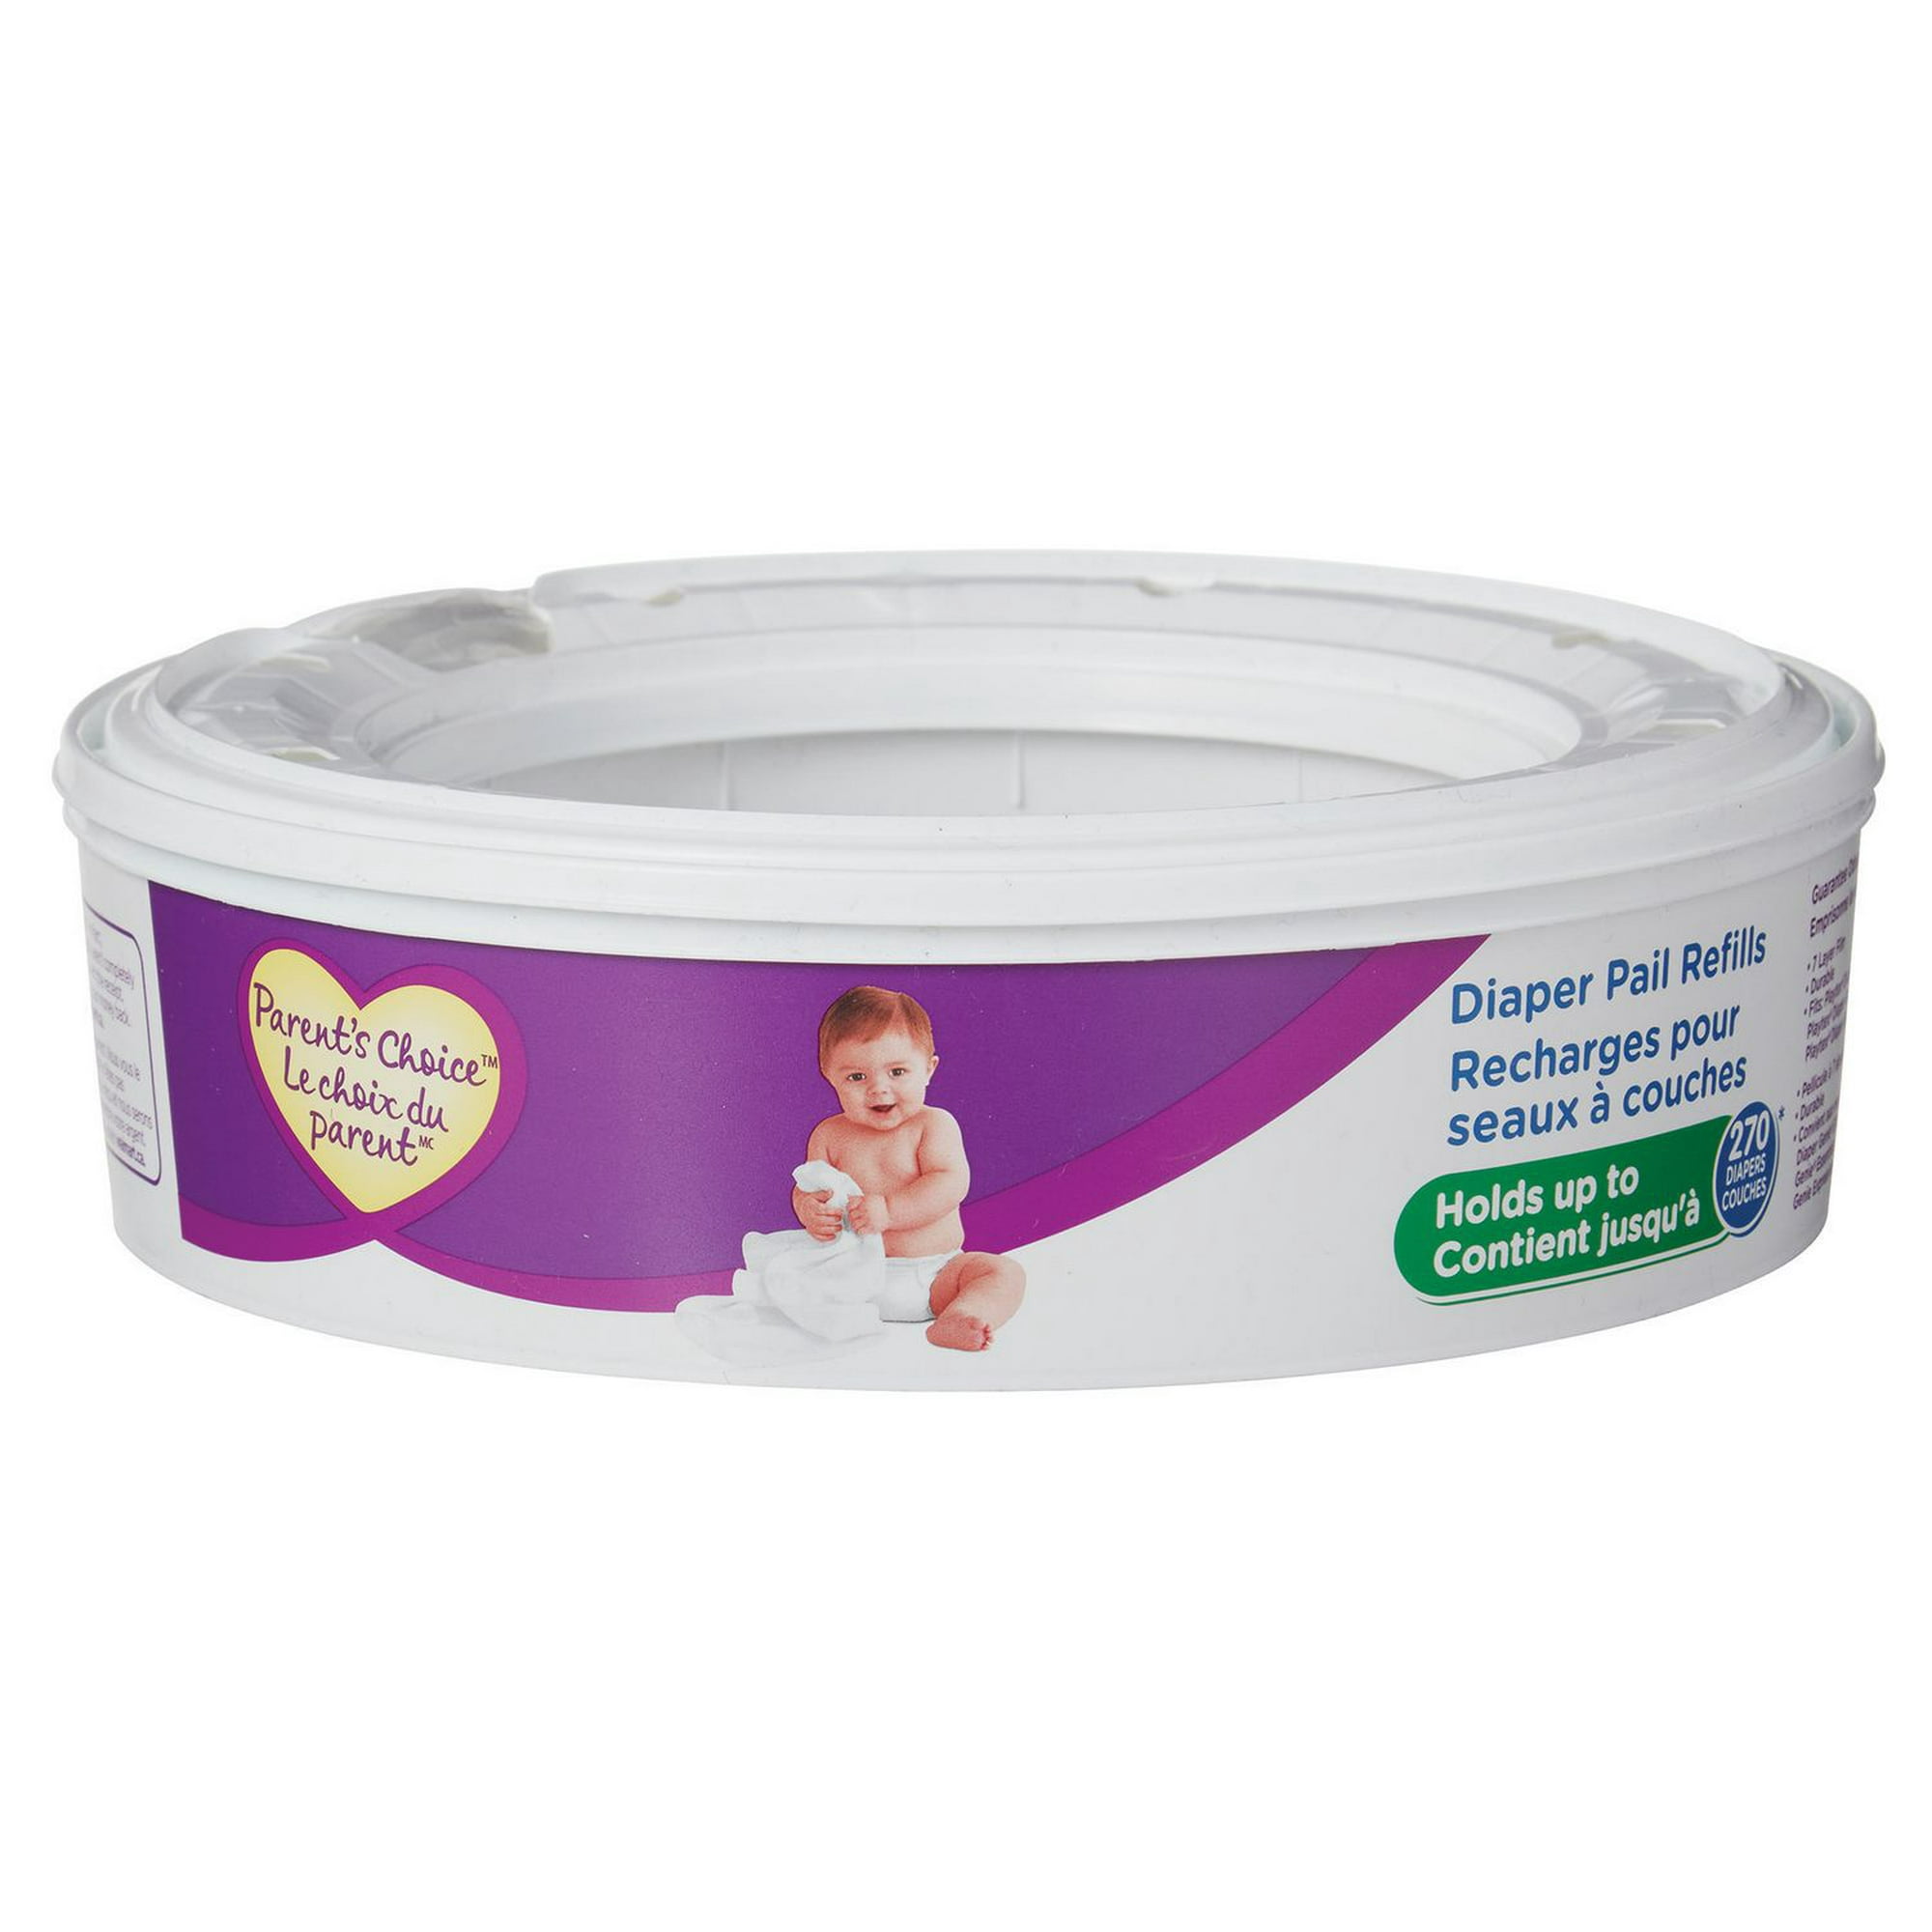 Wipe Warmer - Walmart.com  Baby ads, Diaper, Parents choice diapers